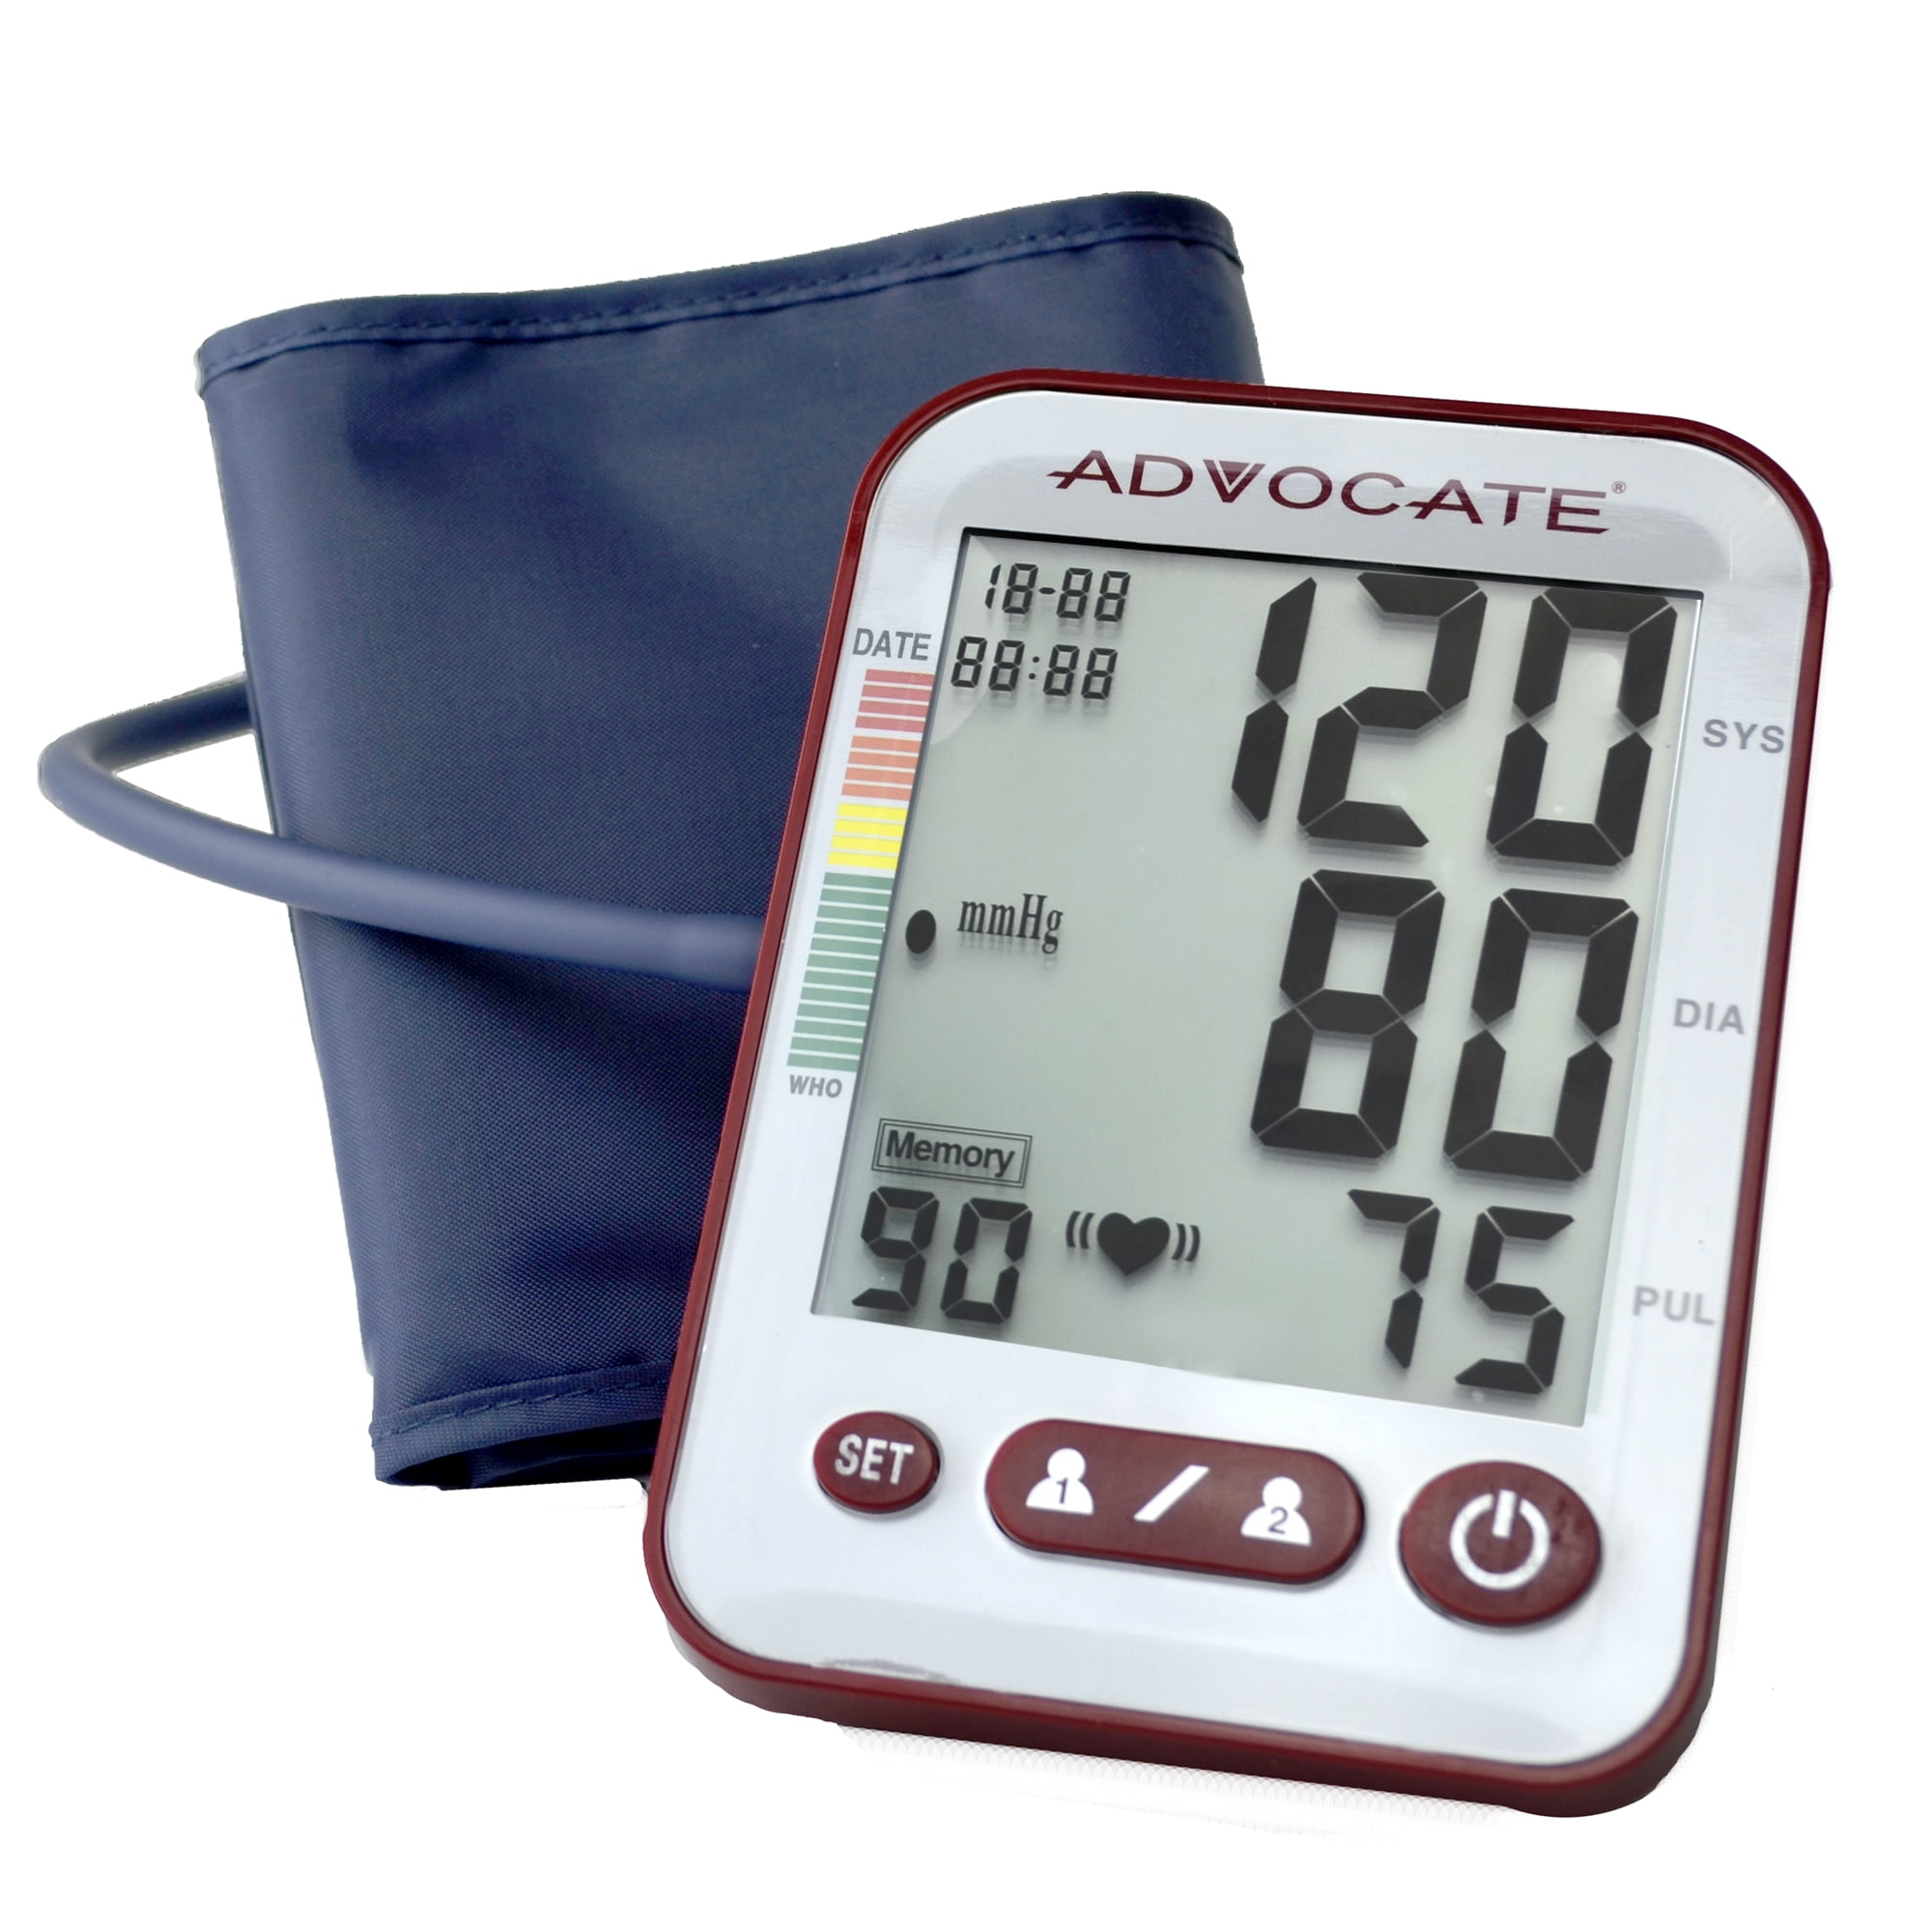 ProCare Basic Upper Arm Blood Pressure Monitorwith Extra Large Cuff